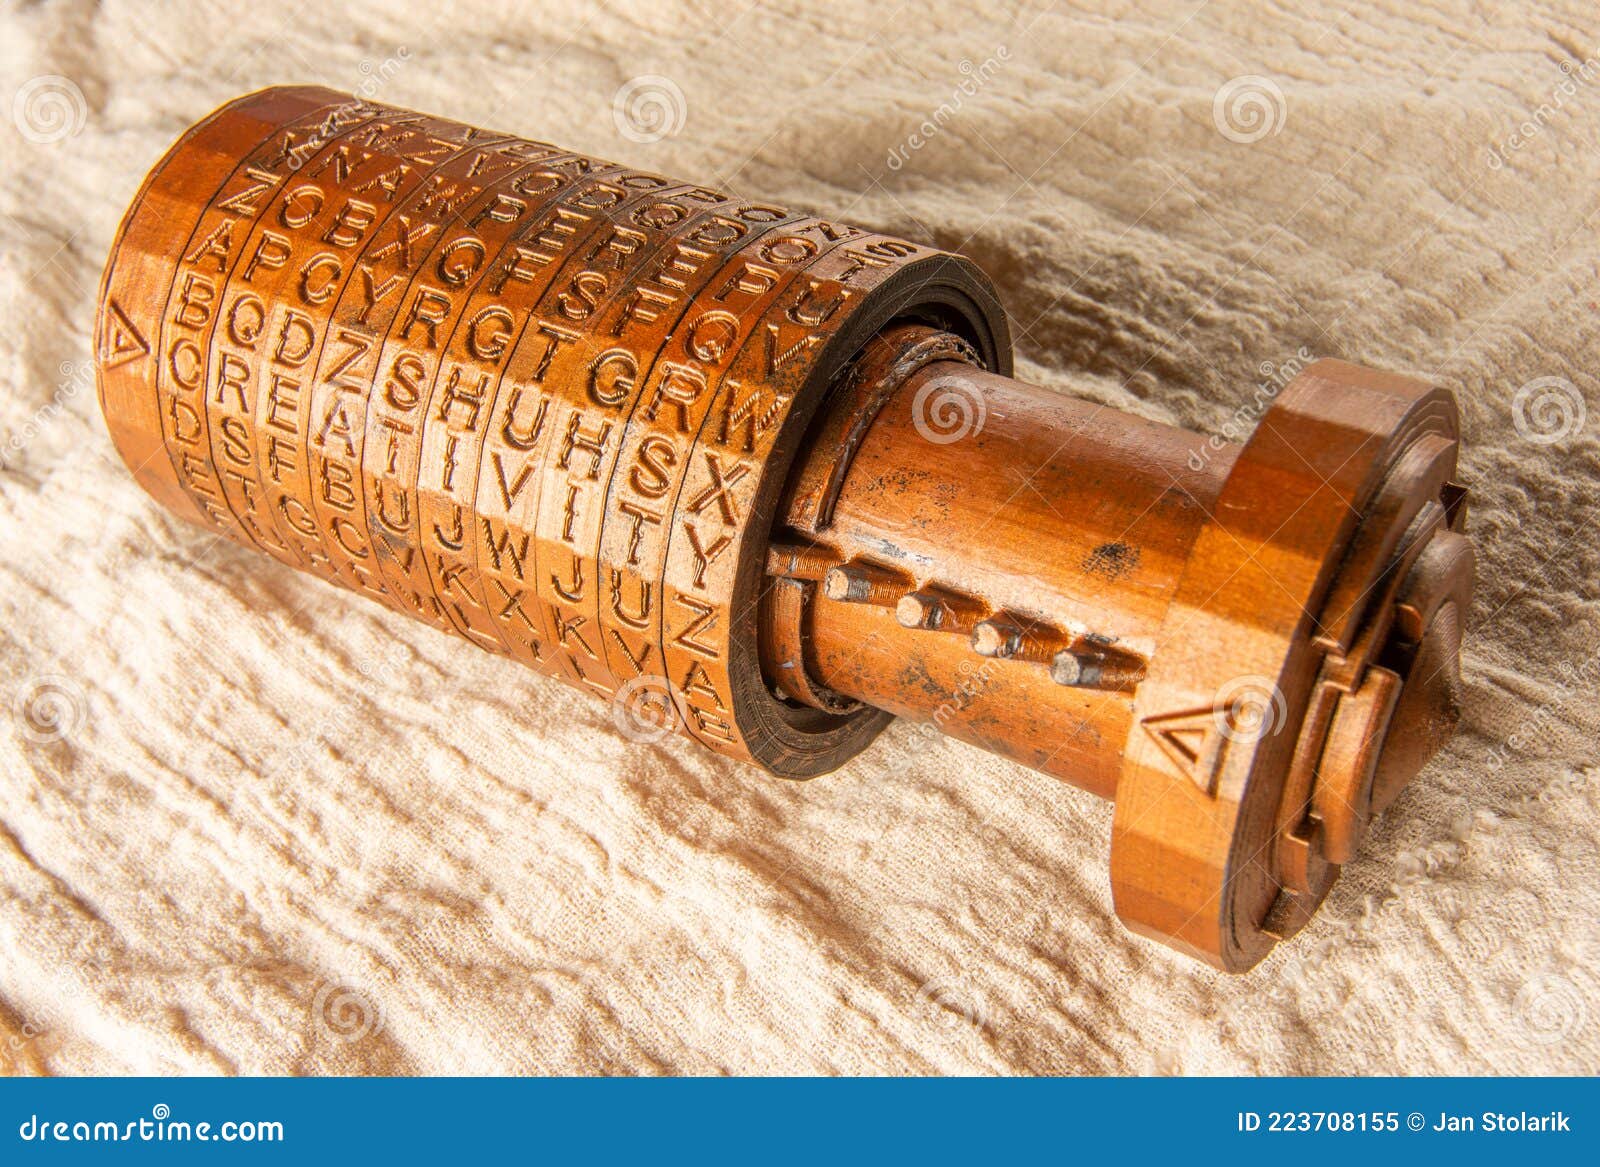 https://thumbs.dreamstime.com/z/opened-brass-cryptex-invented-leonardo-da-vinci-book-code-word-creativity-as-password-set-letters-rings-cryptographic-223708155.jpg